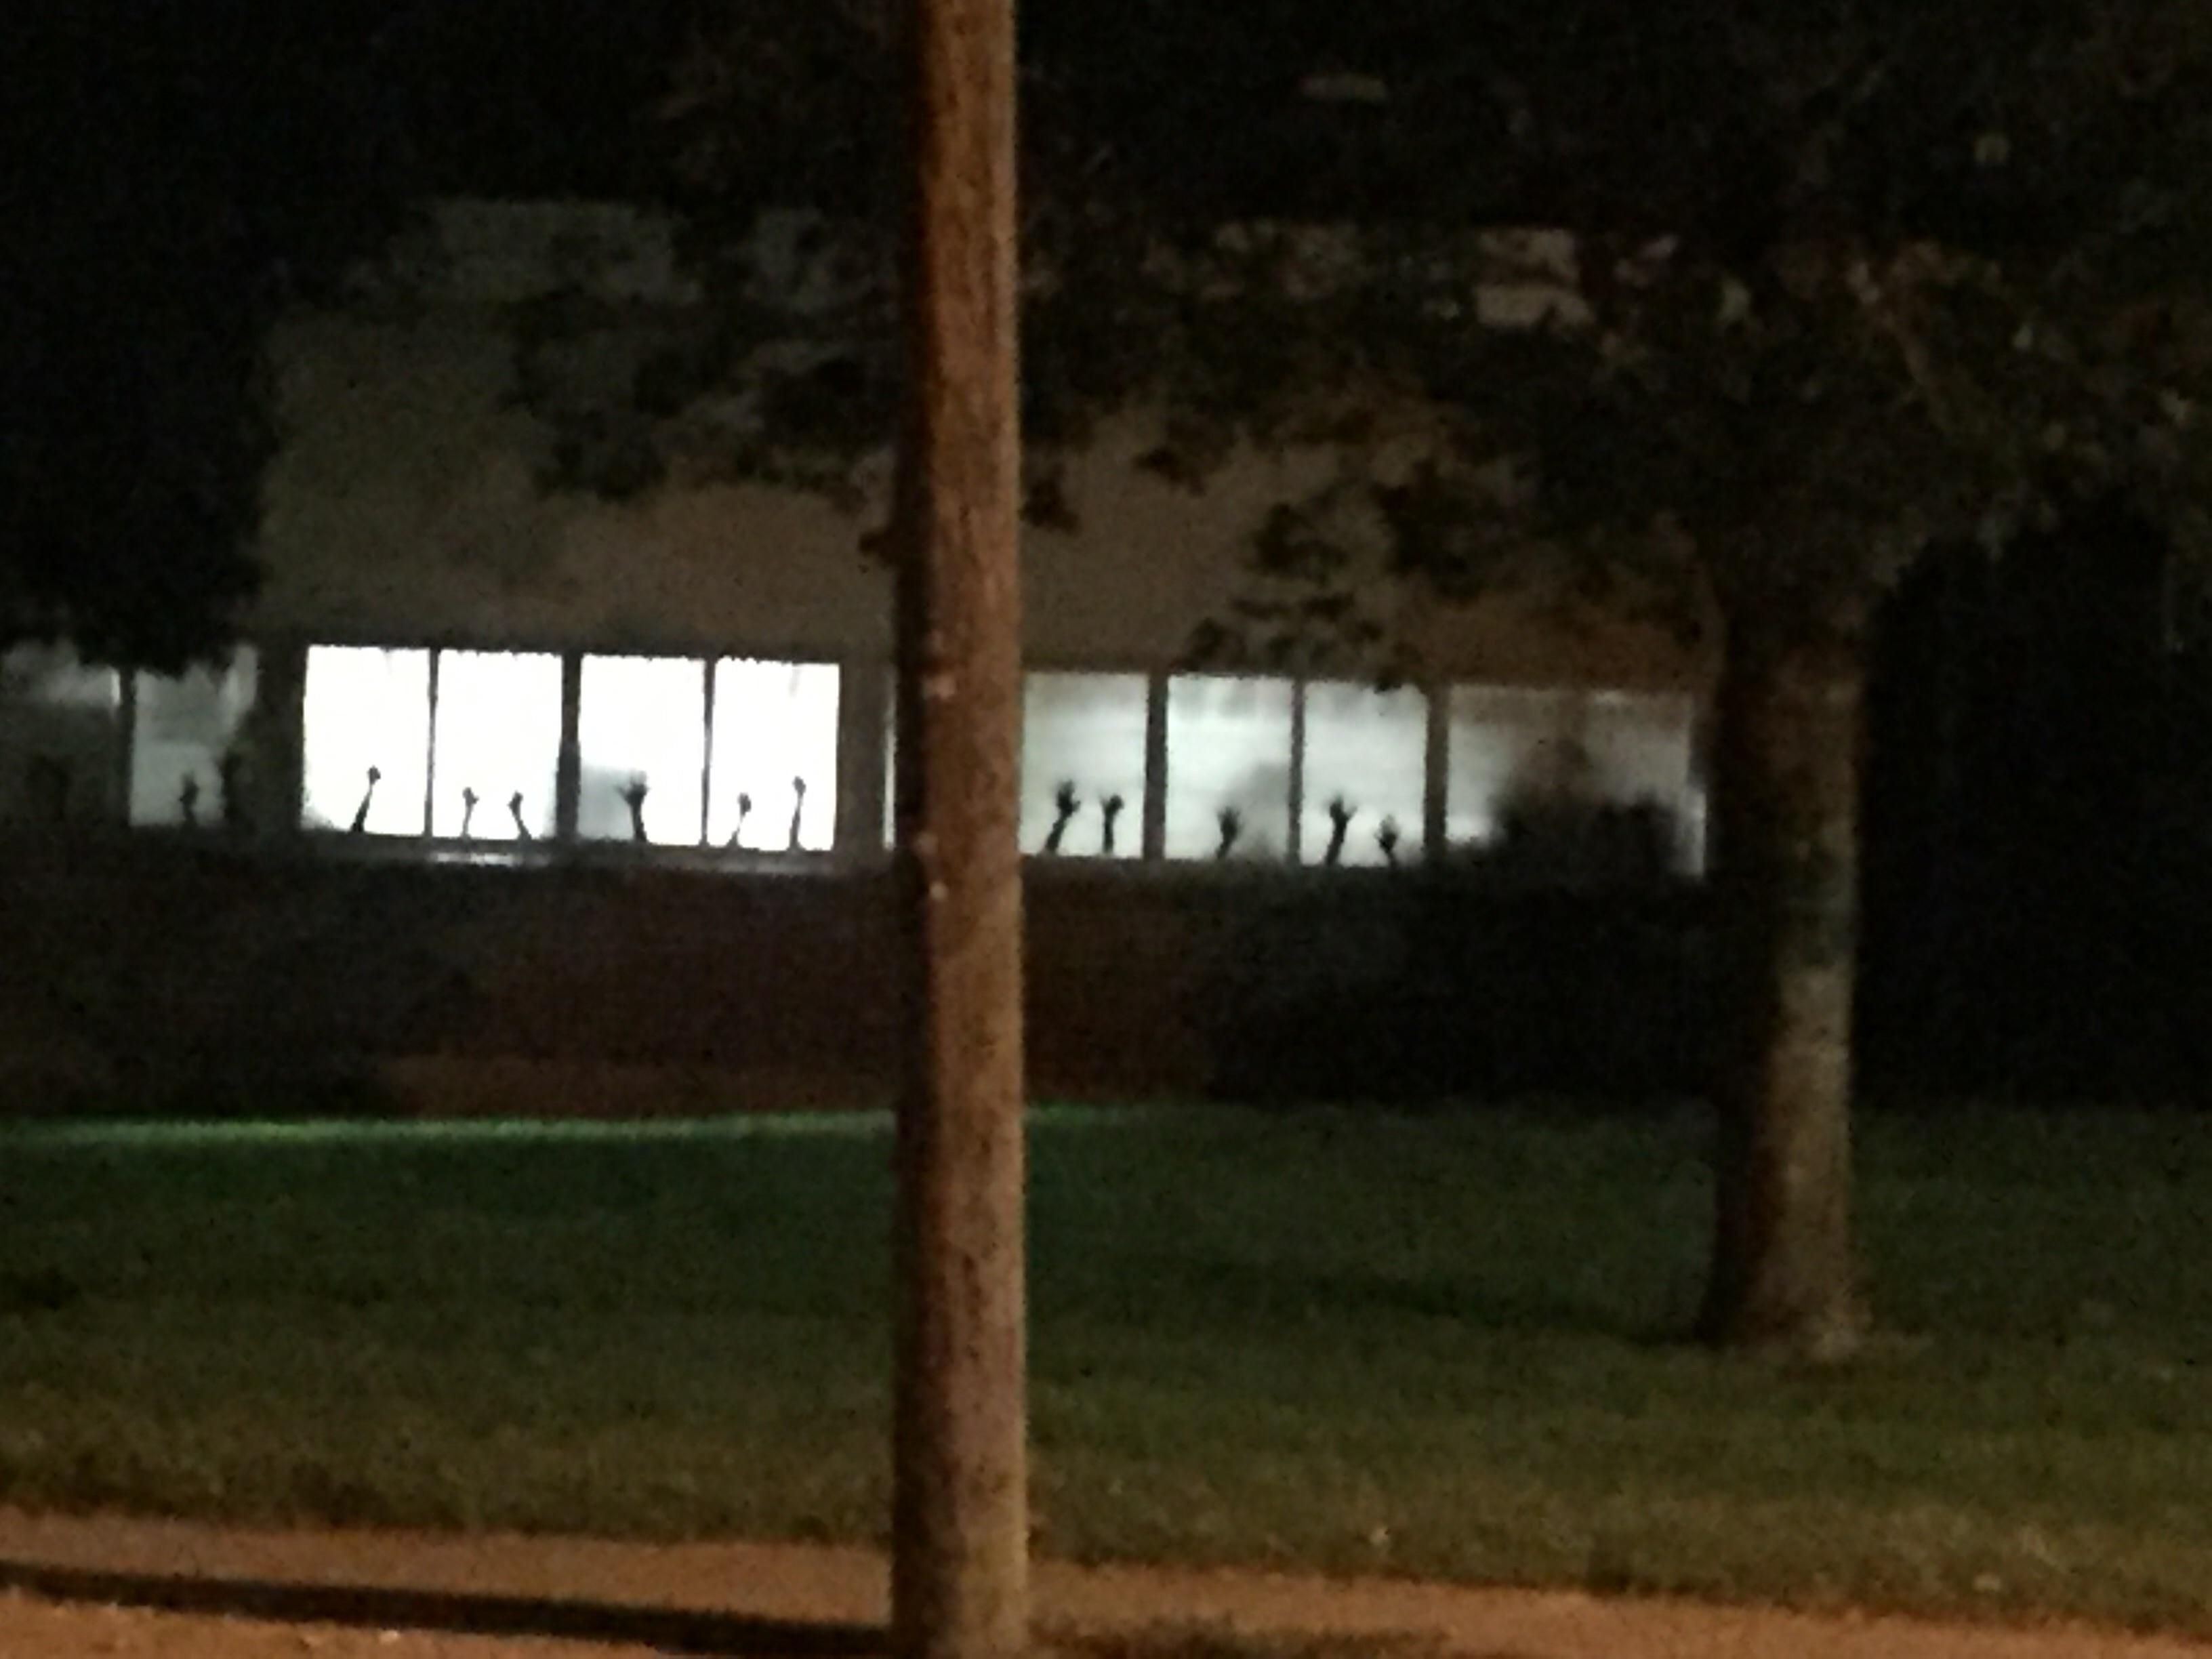 Kindergarten teacher had students trace their hands for the window....creepier than intended